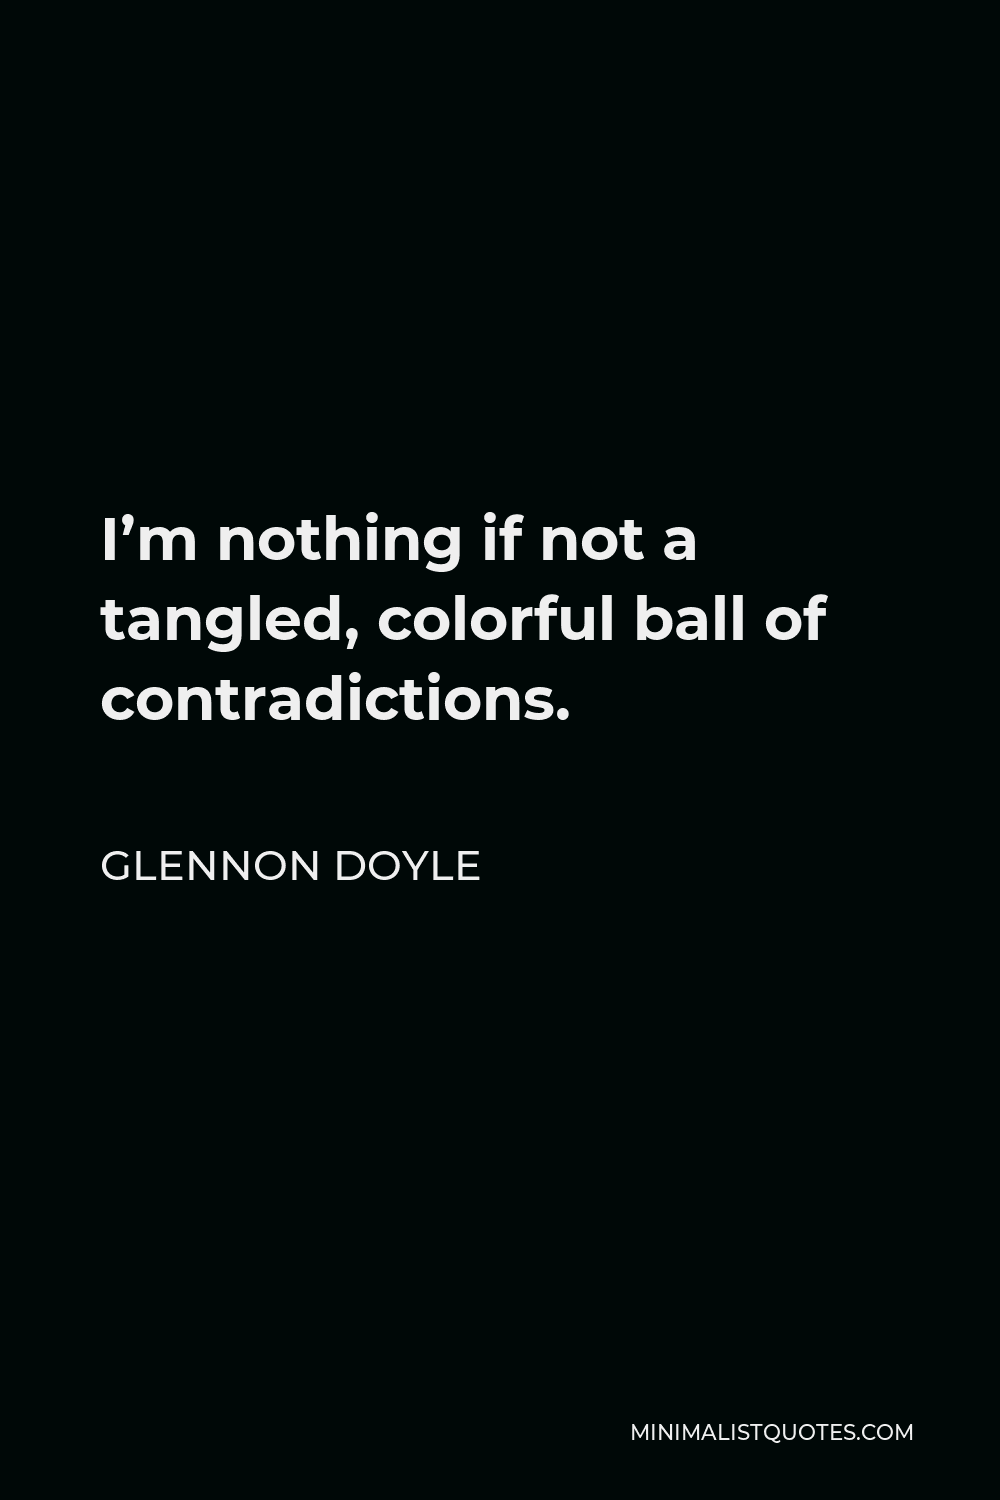 Glennon Doyle Quote - I’m nothing if not a tangled, colorful ball of contradictions.